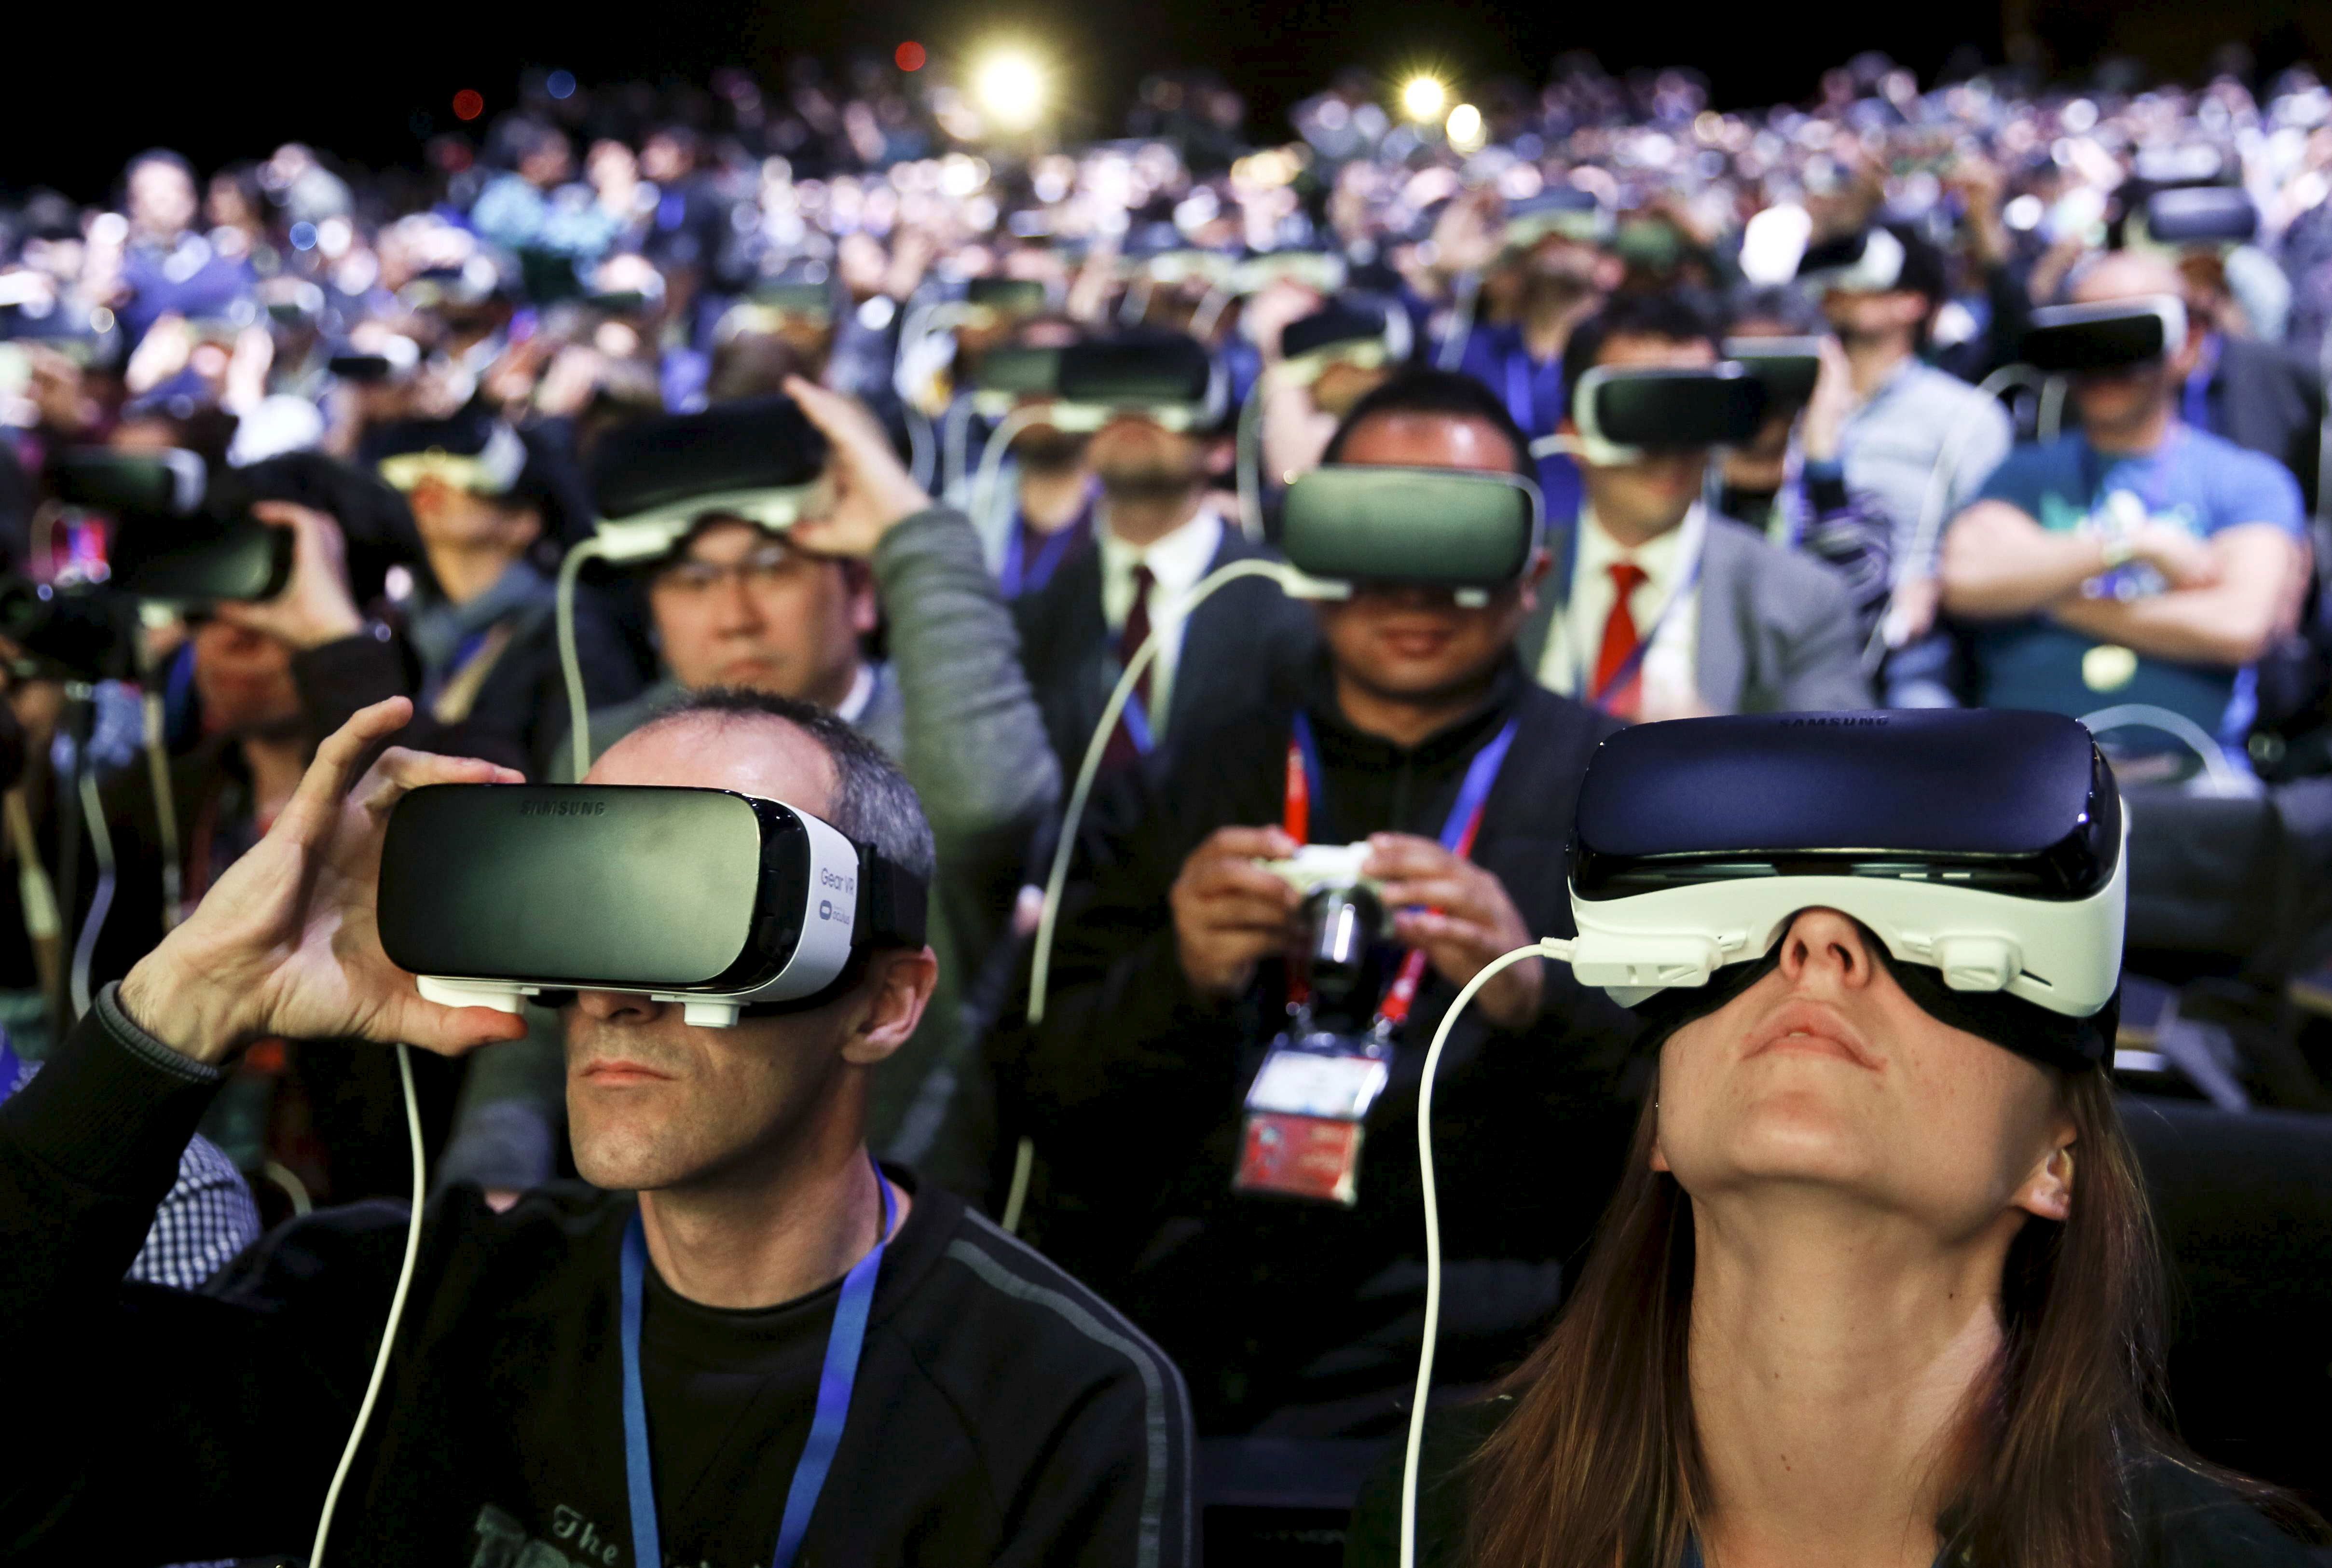 The people got mesmerised with 360-degree video viewing feature of Samsung VR Gear